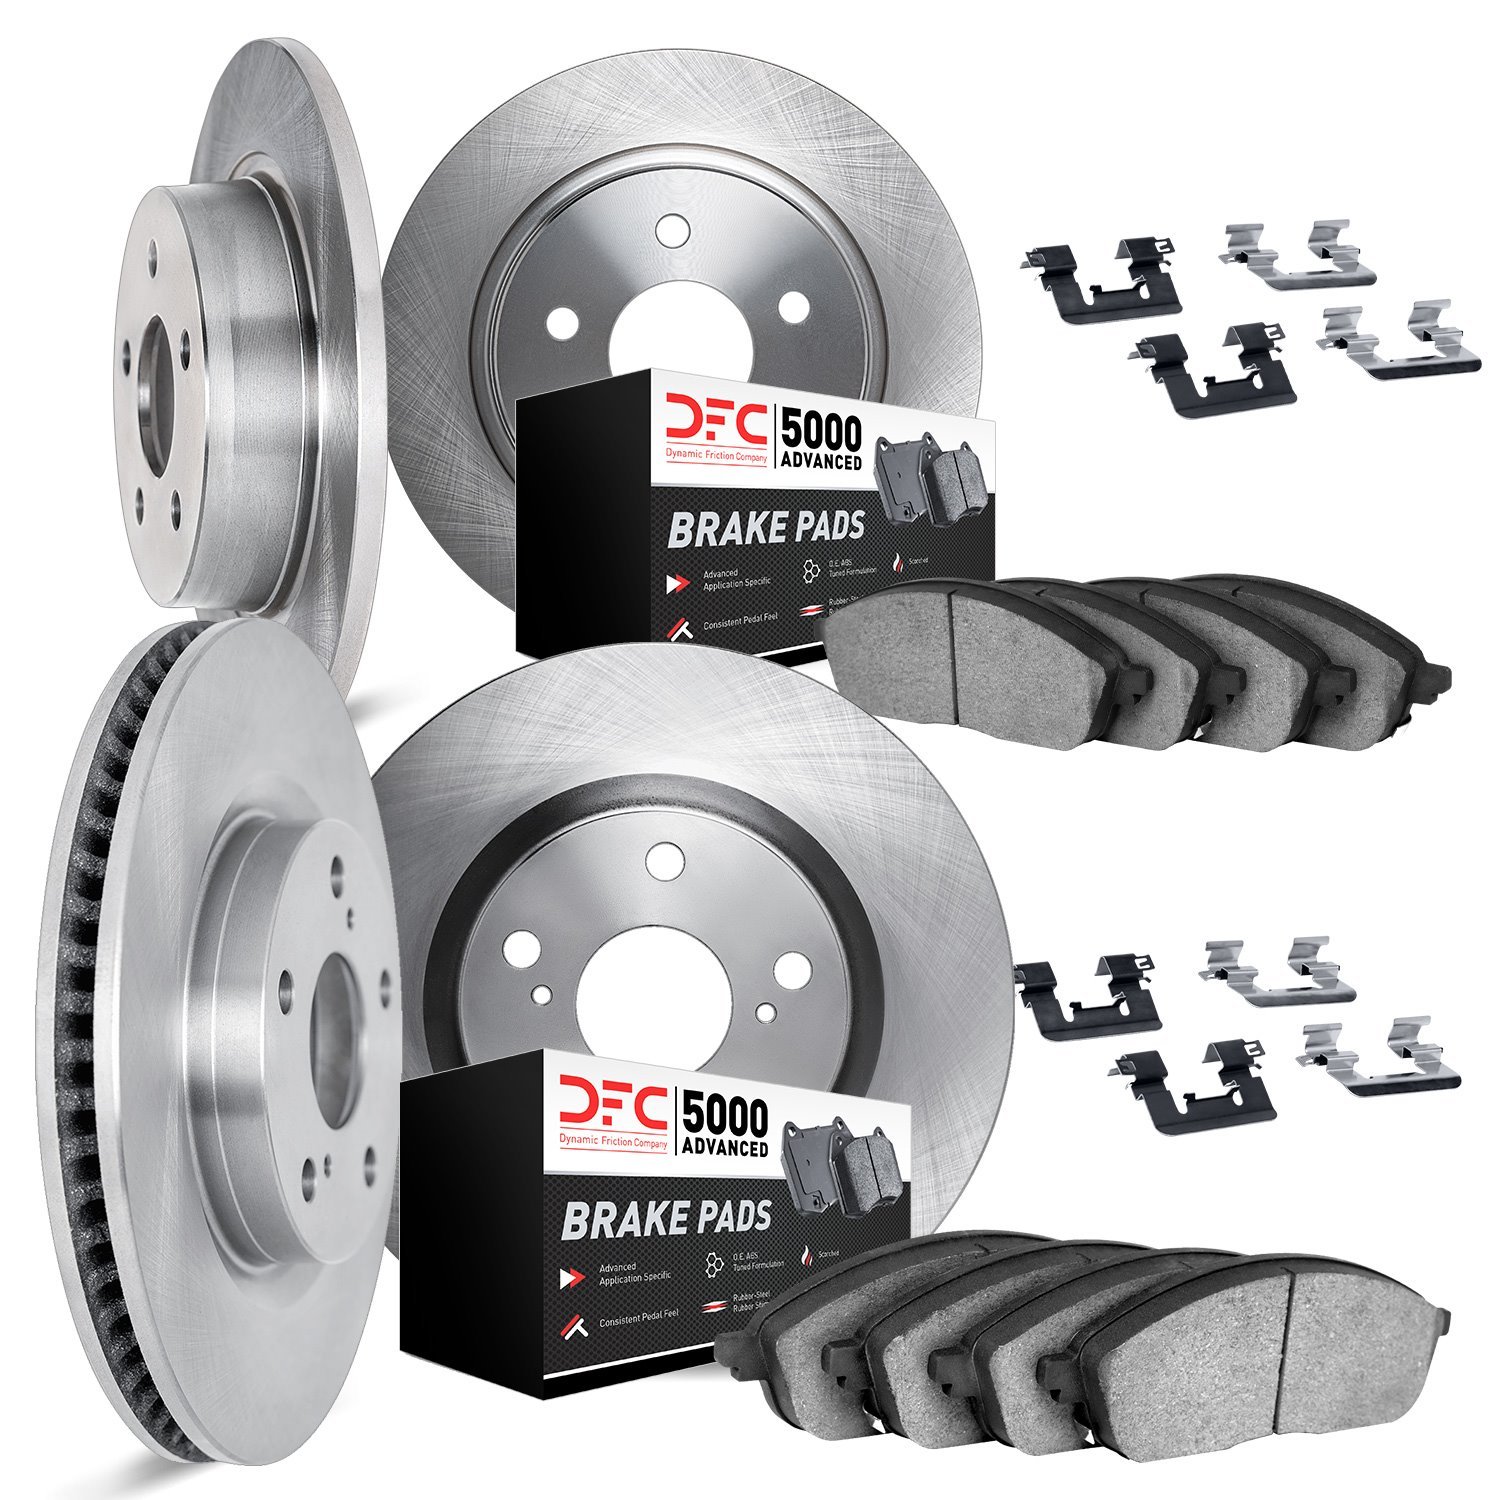 6514-01005 Brake Rotors w/5000 Advanced Brake Pads Kit with Hardware, 2010-2013 Suzuki, Position: Front and Rear